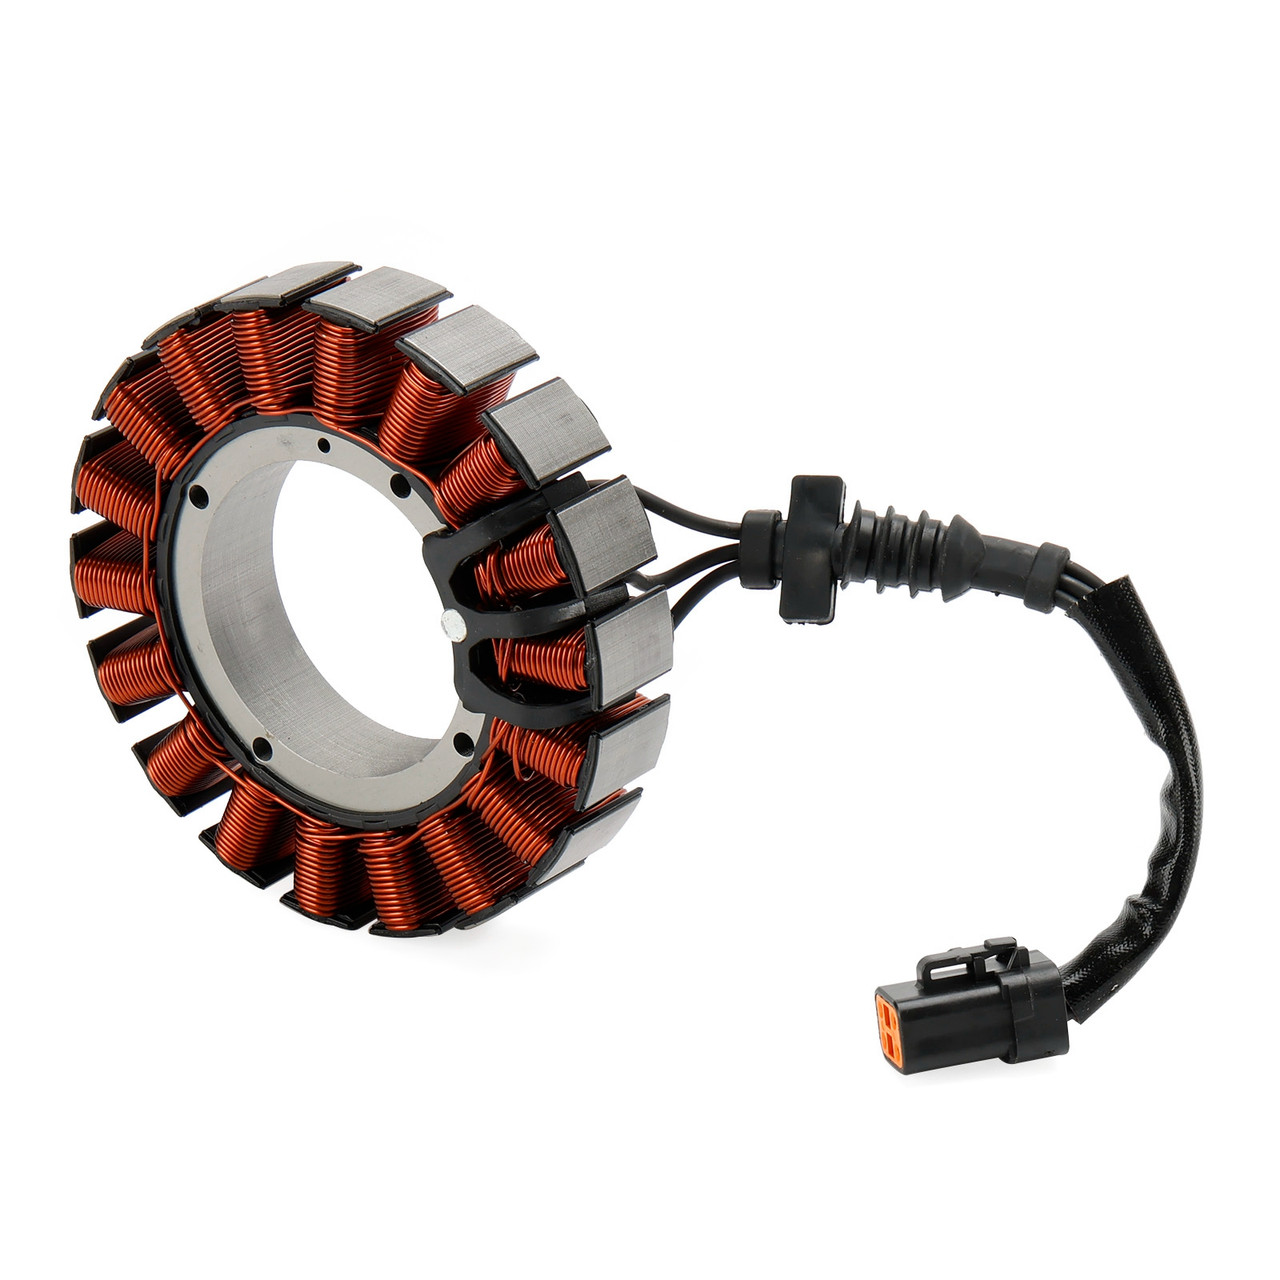 3 Phase 40 Amp Stator For 2007 Softail and Dyna models. Replaces 30017-07